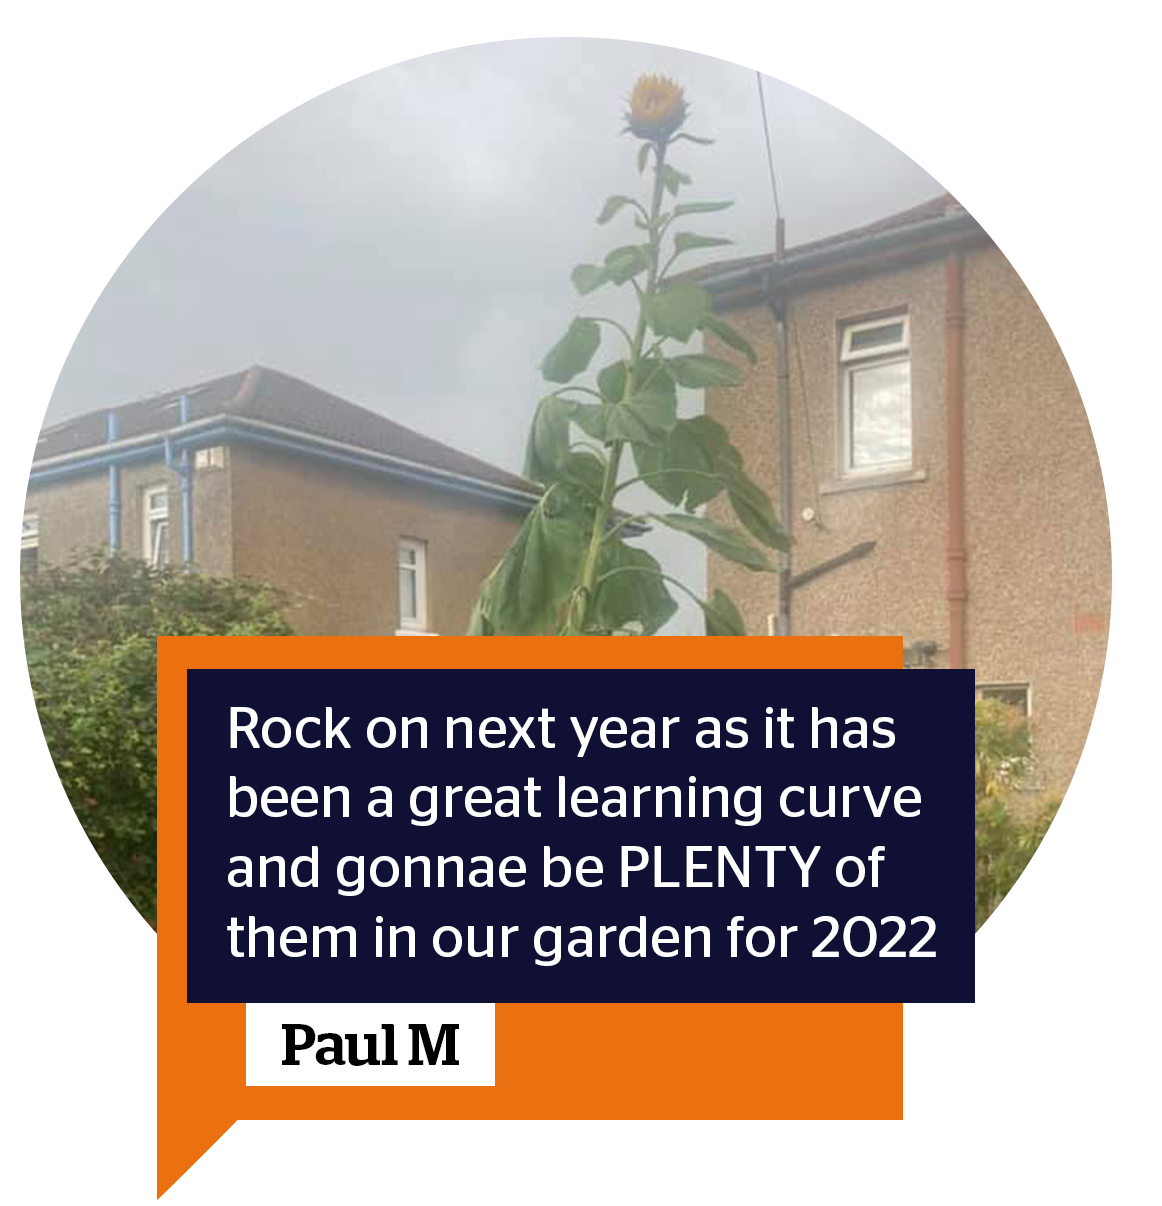 Paul m -  rock on next year as it has been a great learning curve and gonnae be PLENTY of them in our garden for 2022